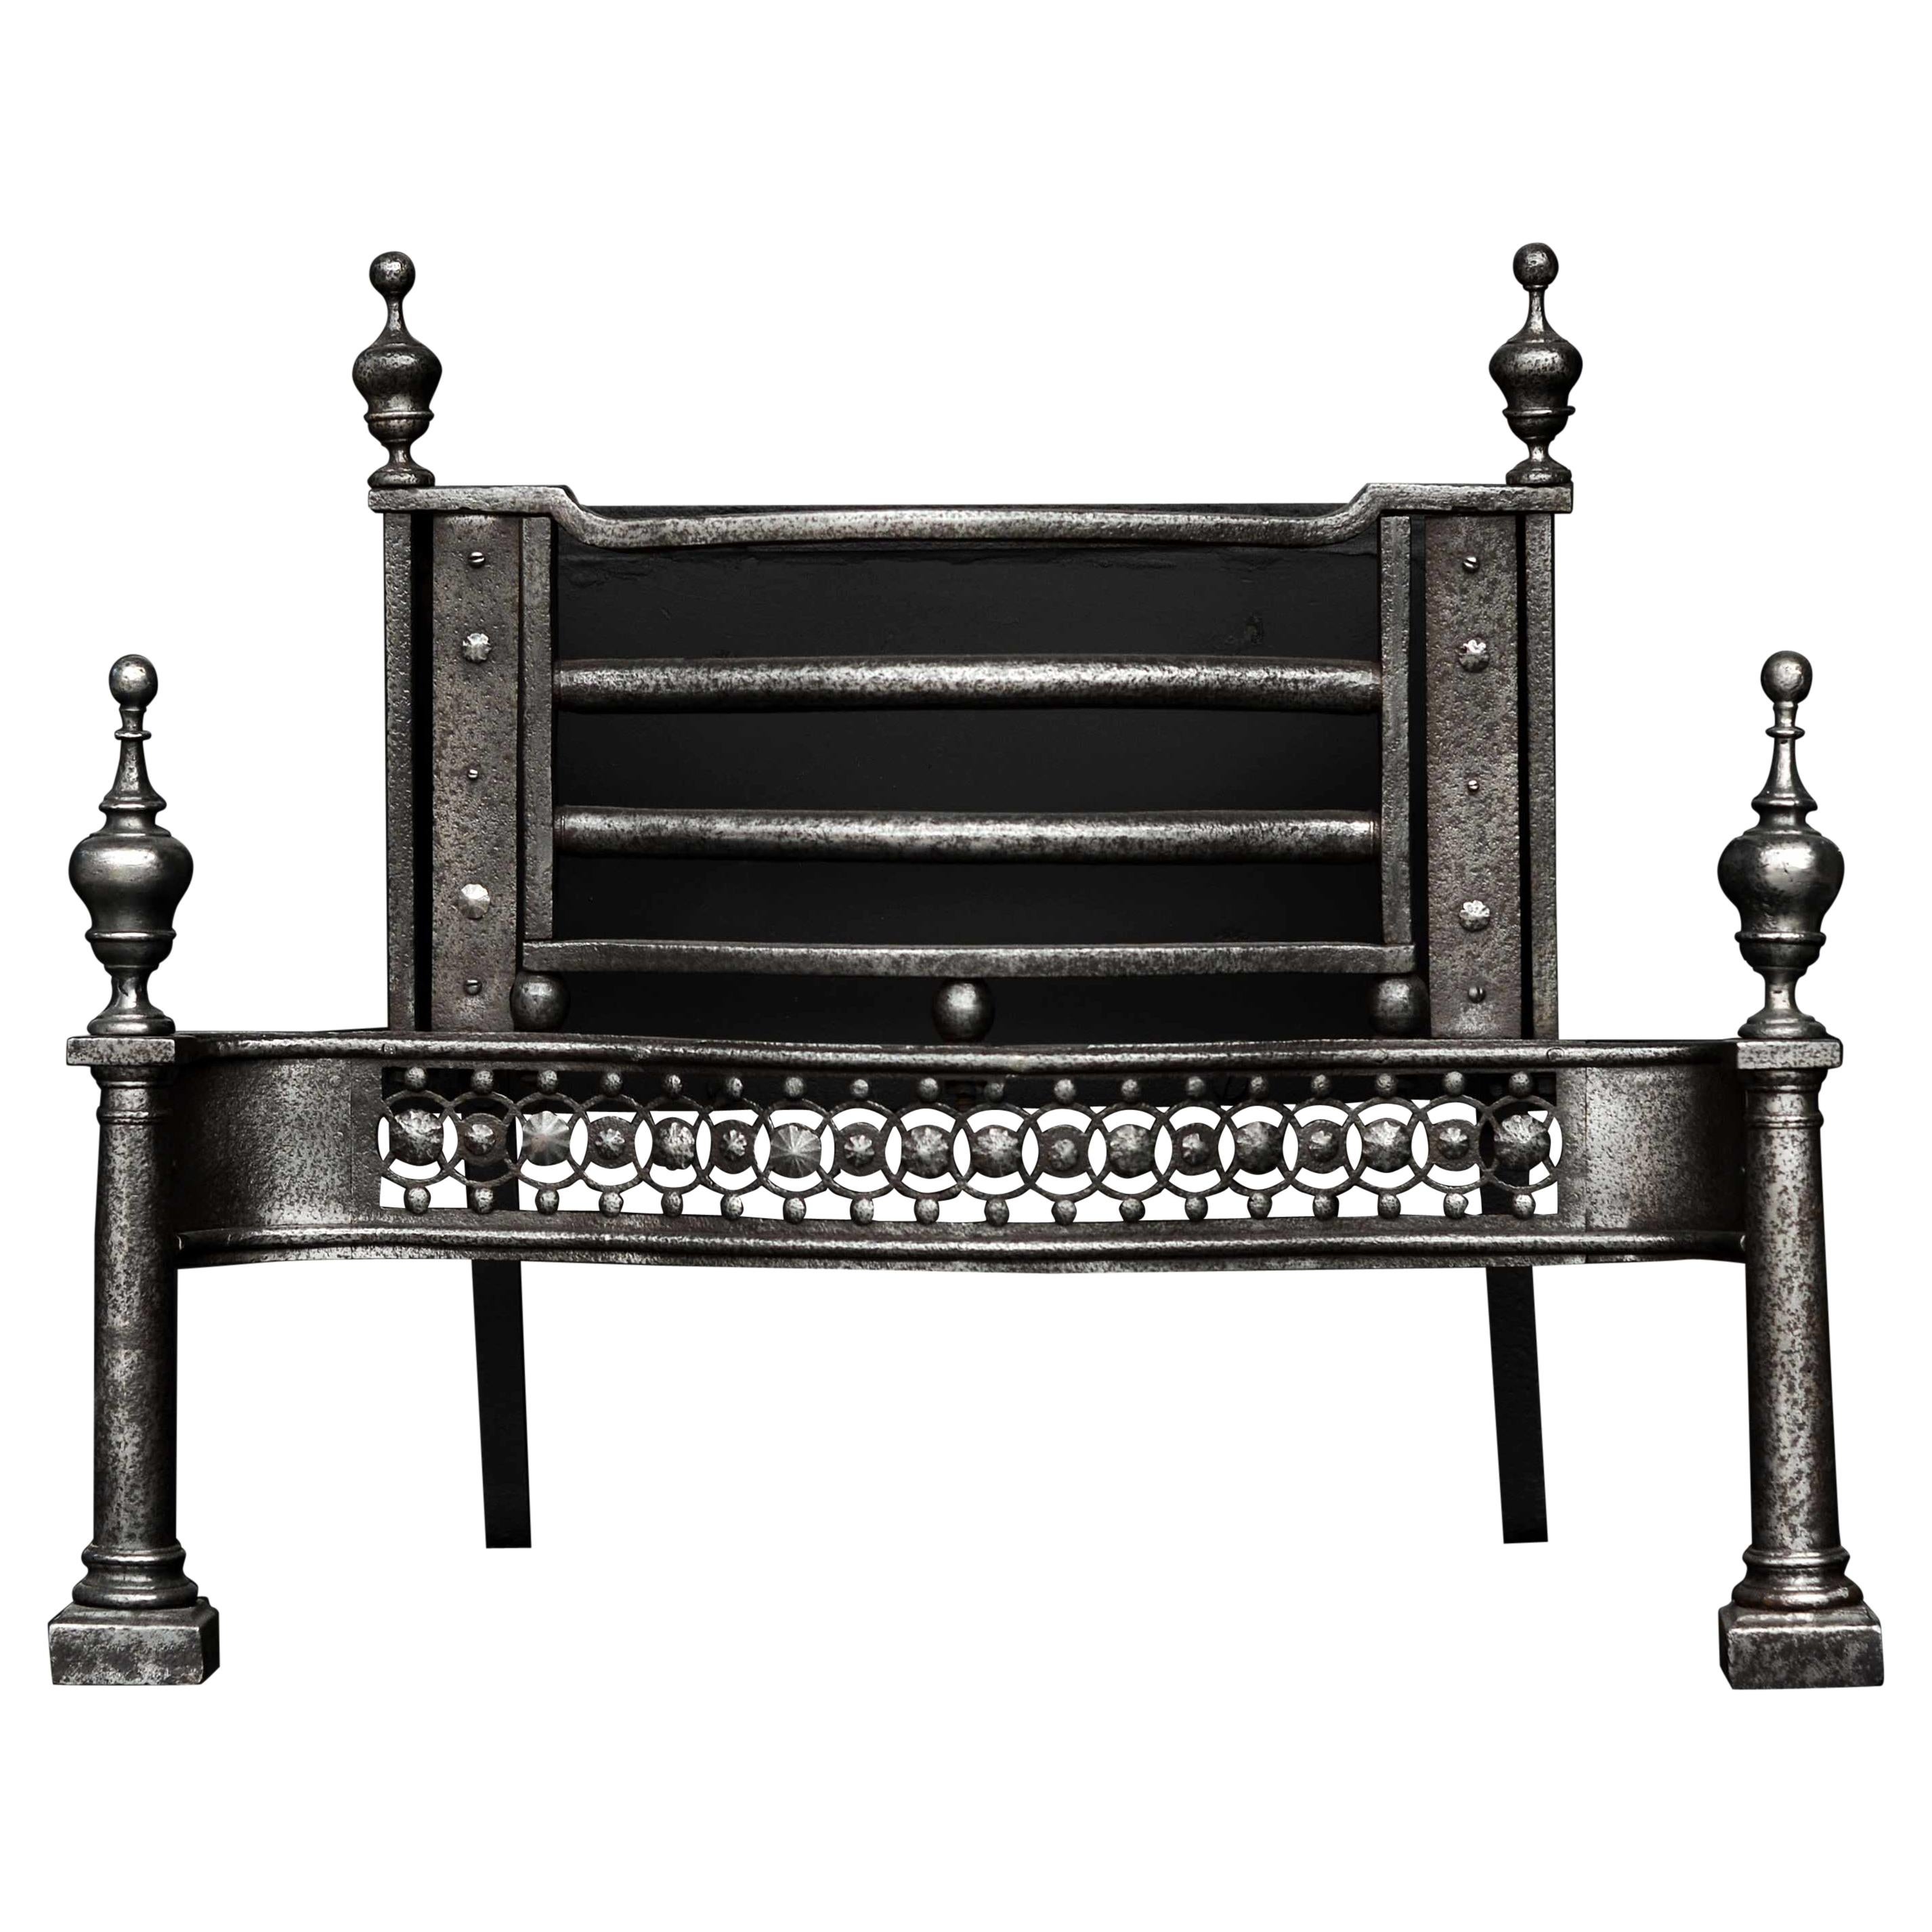 Period 18th Century Polished Steel Firegrate